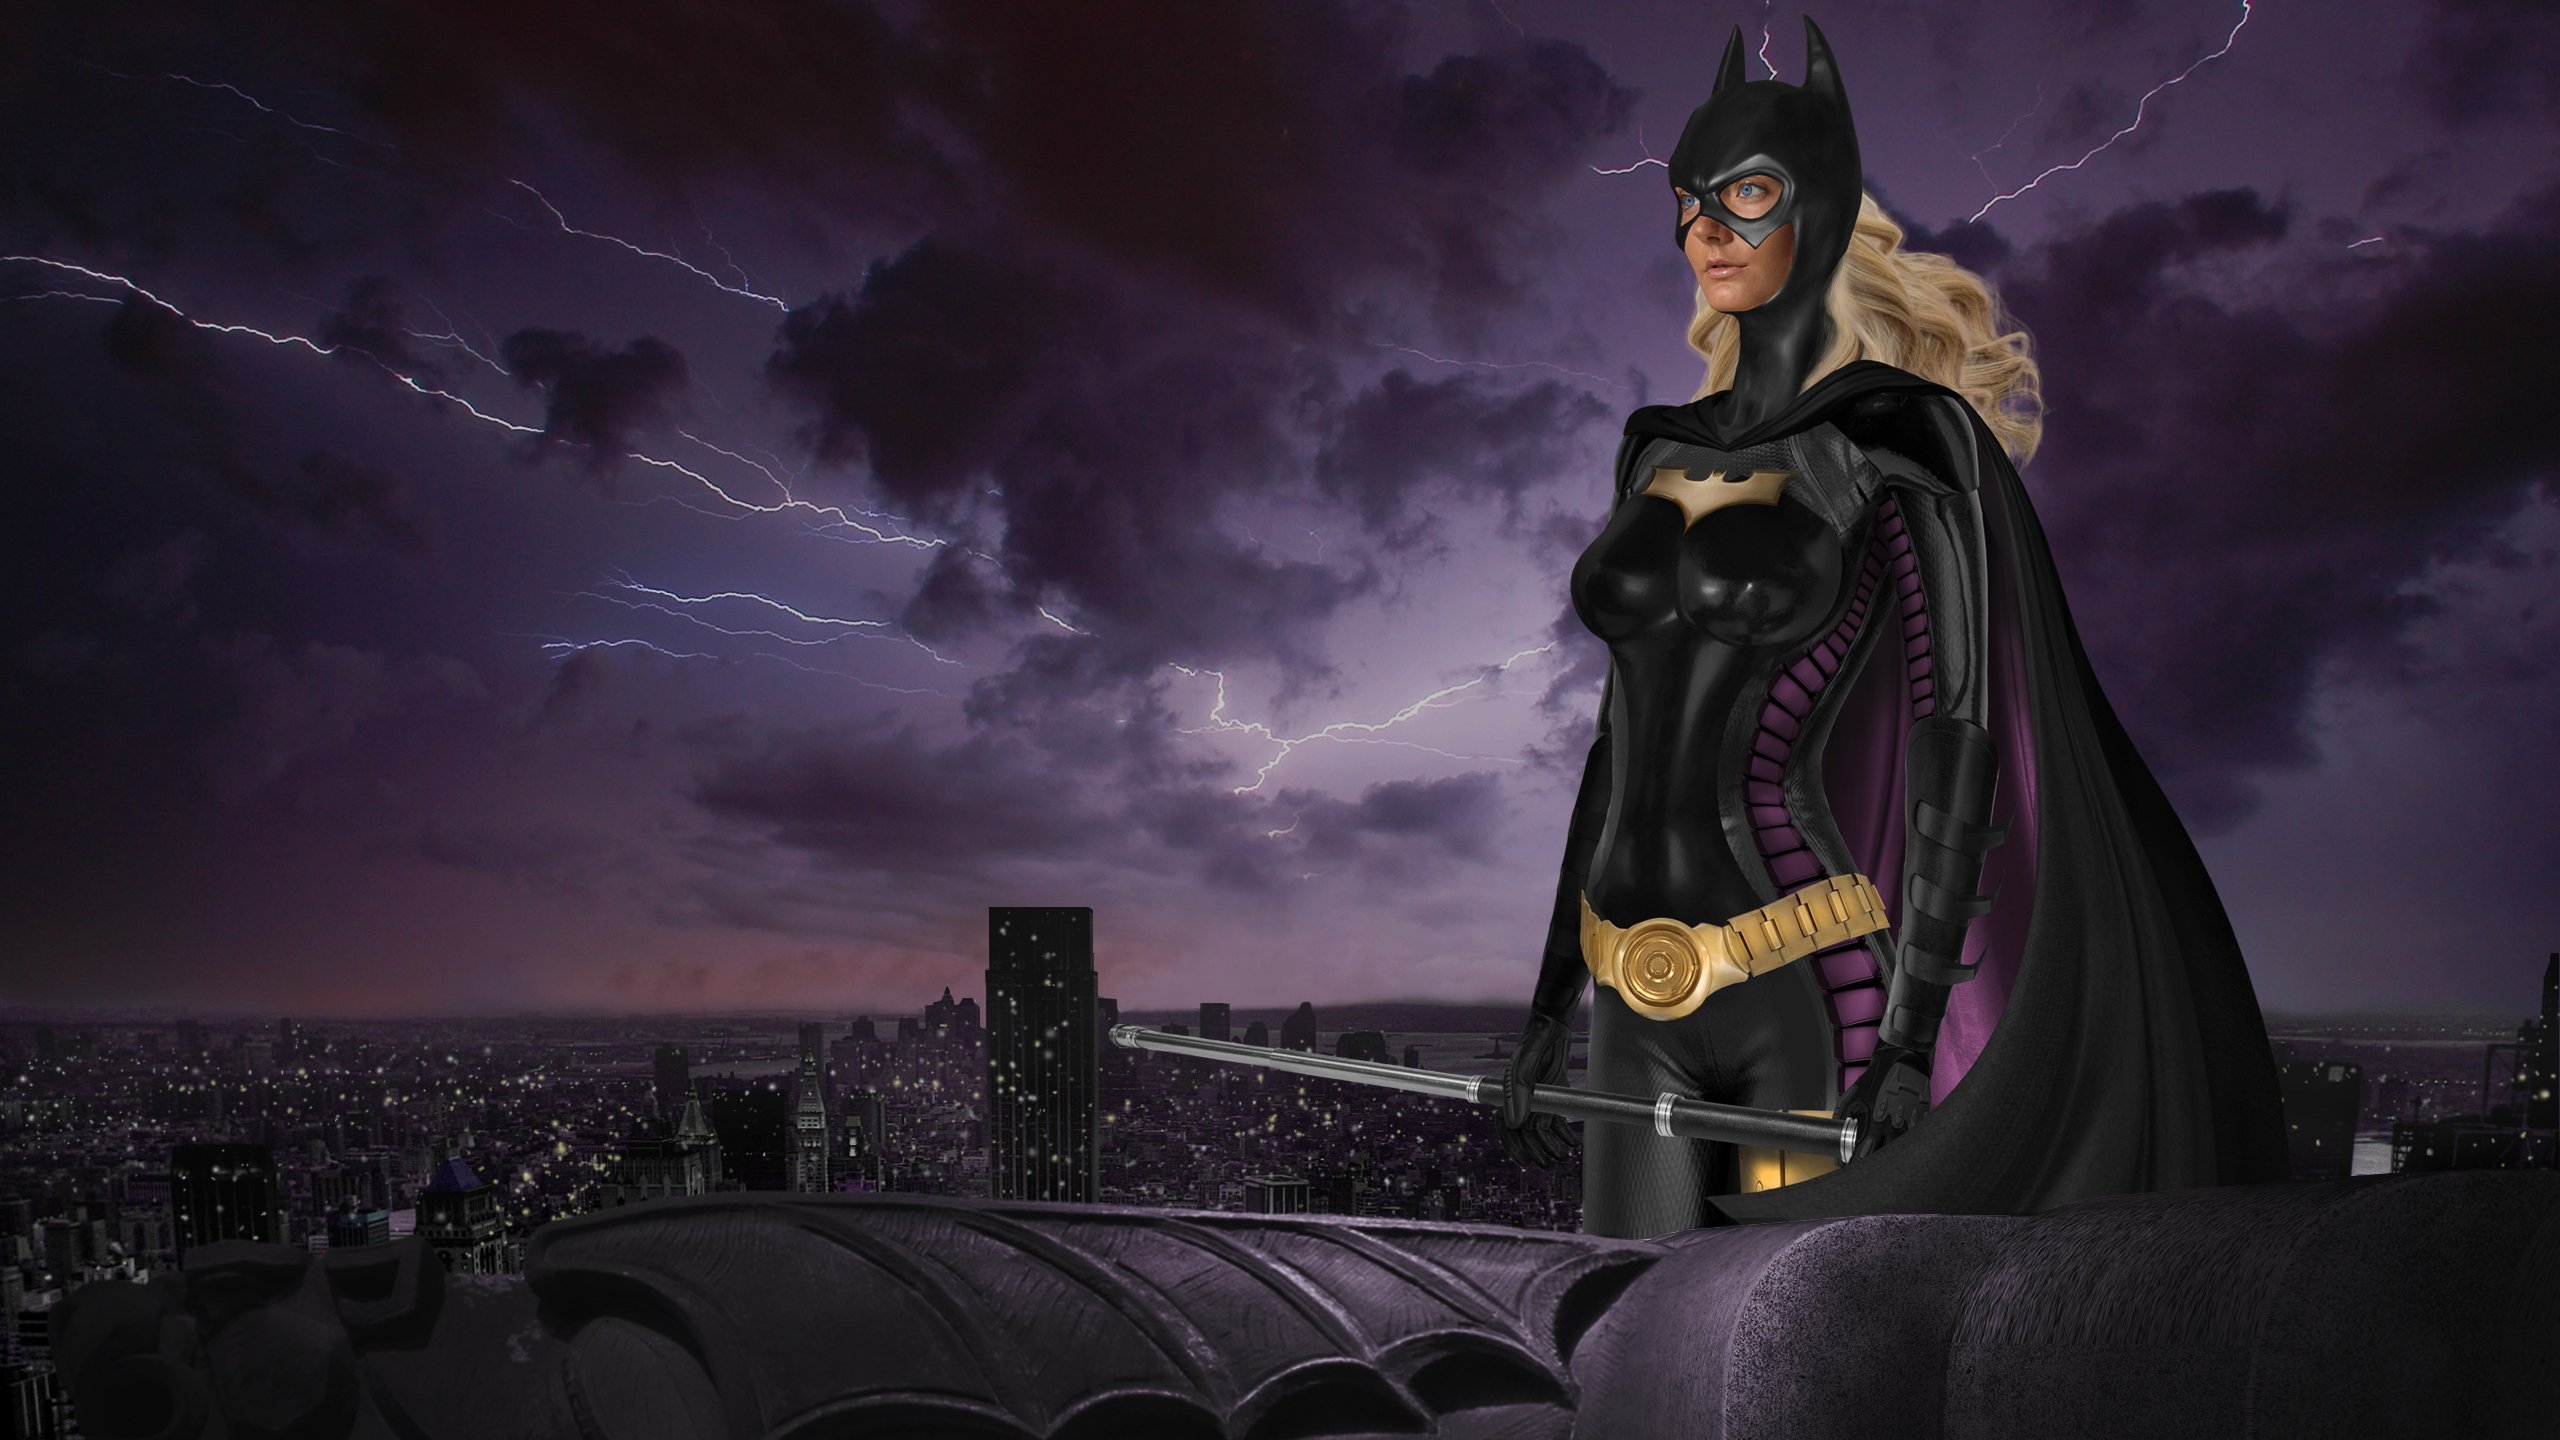 Best Batgirl Wallpaper Id 234982 For High Resolution Hd 2560x1440 Images, Photos, Reviews